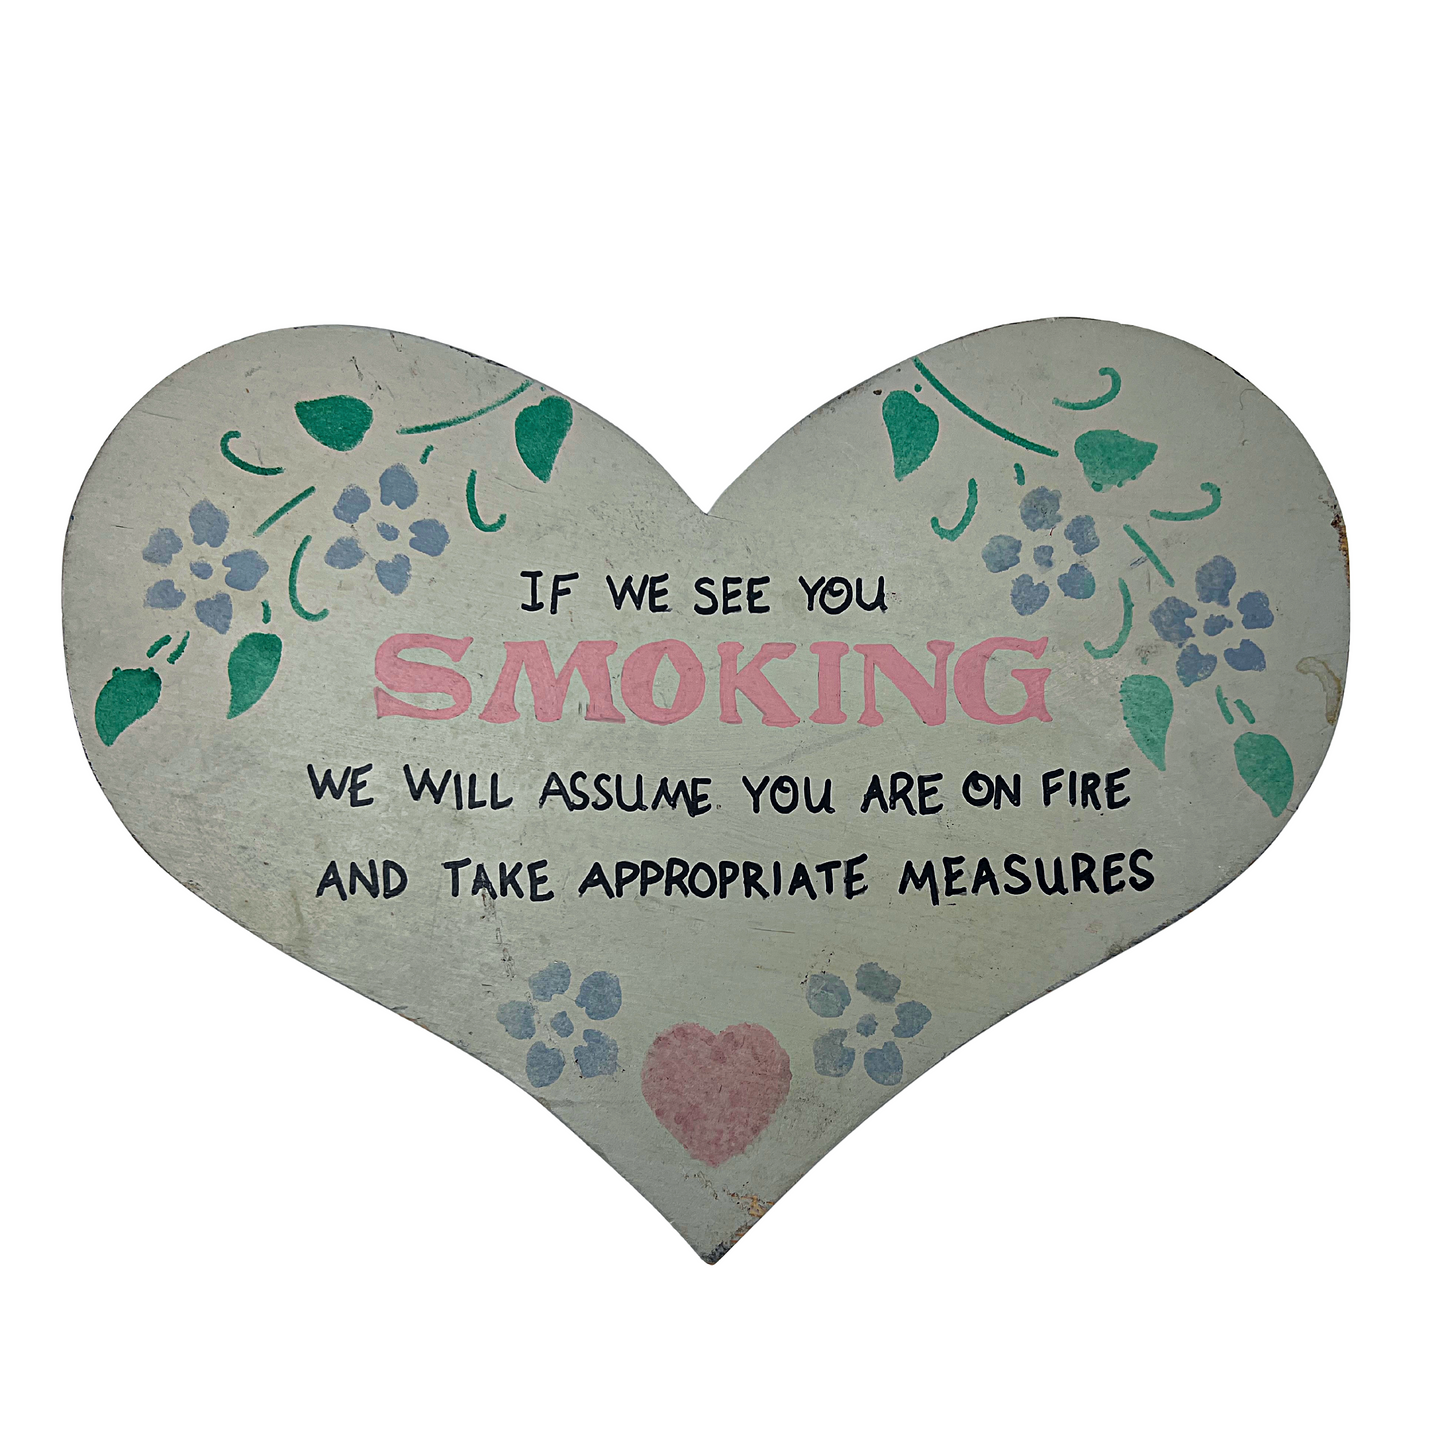 90’s “If We See You SMOKING We Will Assume You Are on Fire and Take Appropriate Measures” Wooden Heart Wall Hanging